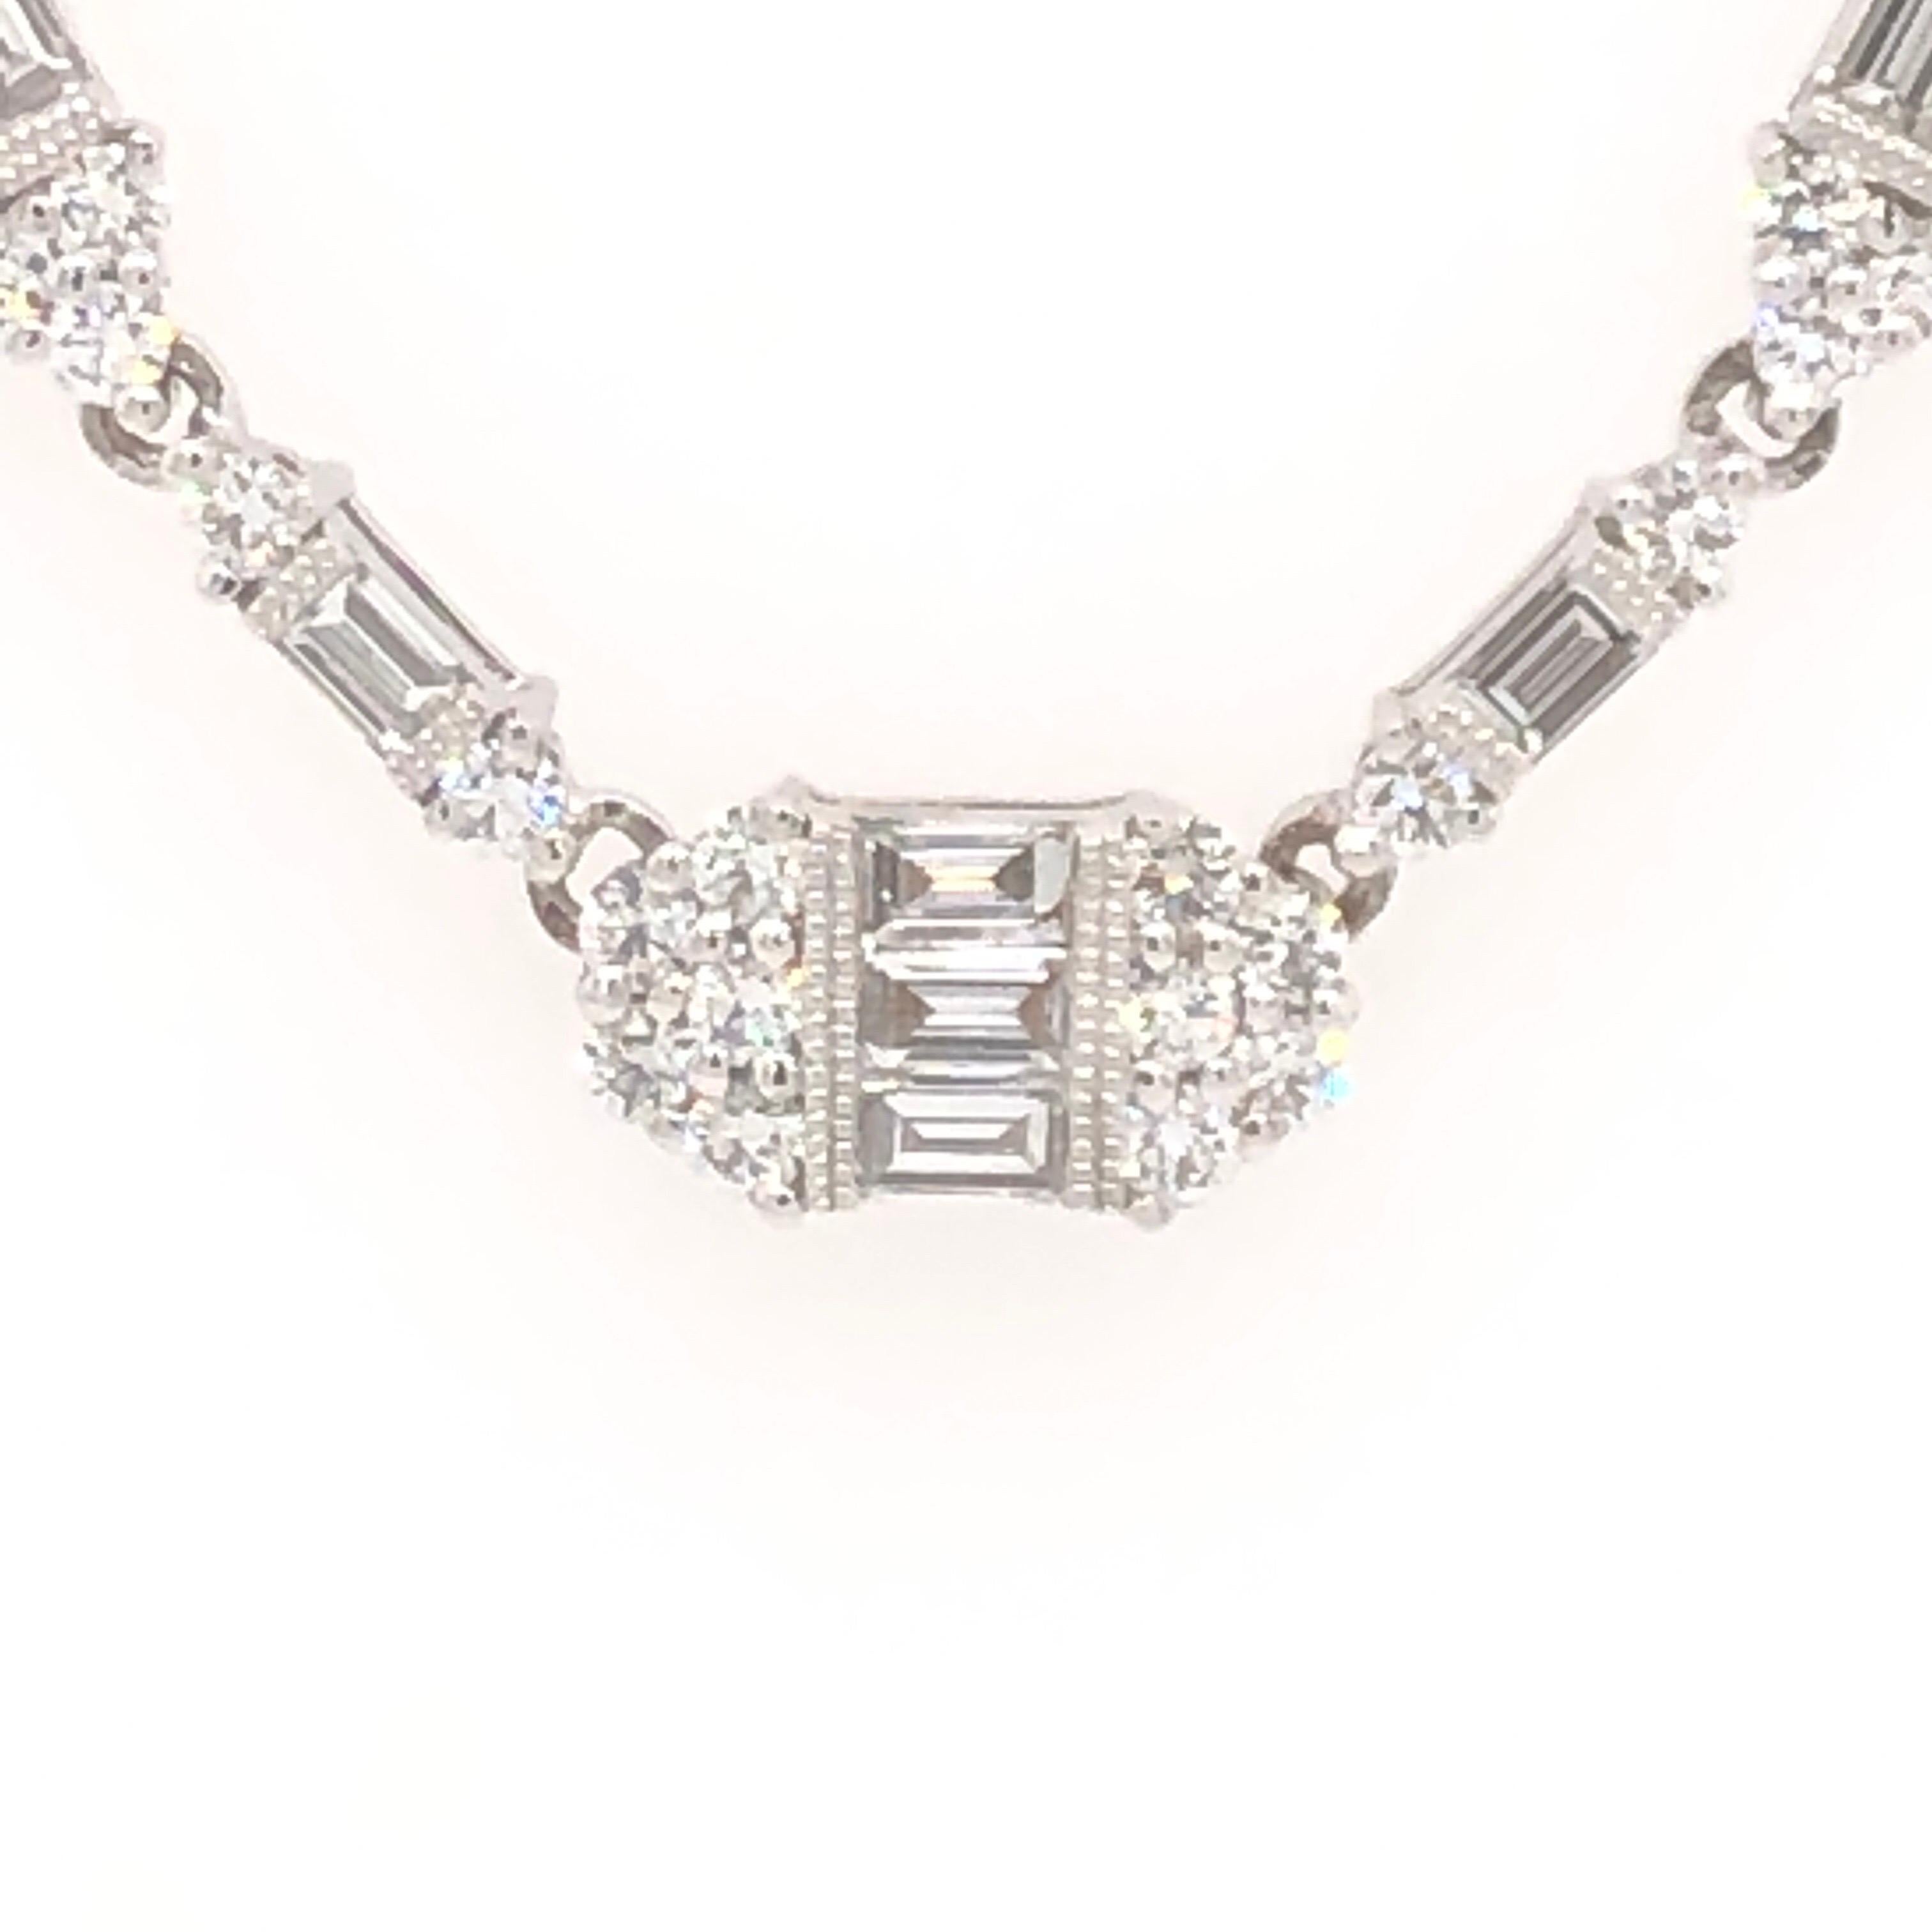 Elegant and stylish with a touch of old world, this necklace's design lends it to be worn for formal occasions and or more casual attire, i.e. your favorite jeans and blouse with some schnazzy (its just fun to say) flats or heels. It sits softly